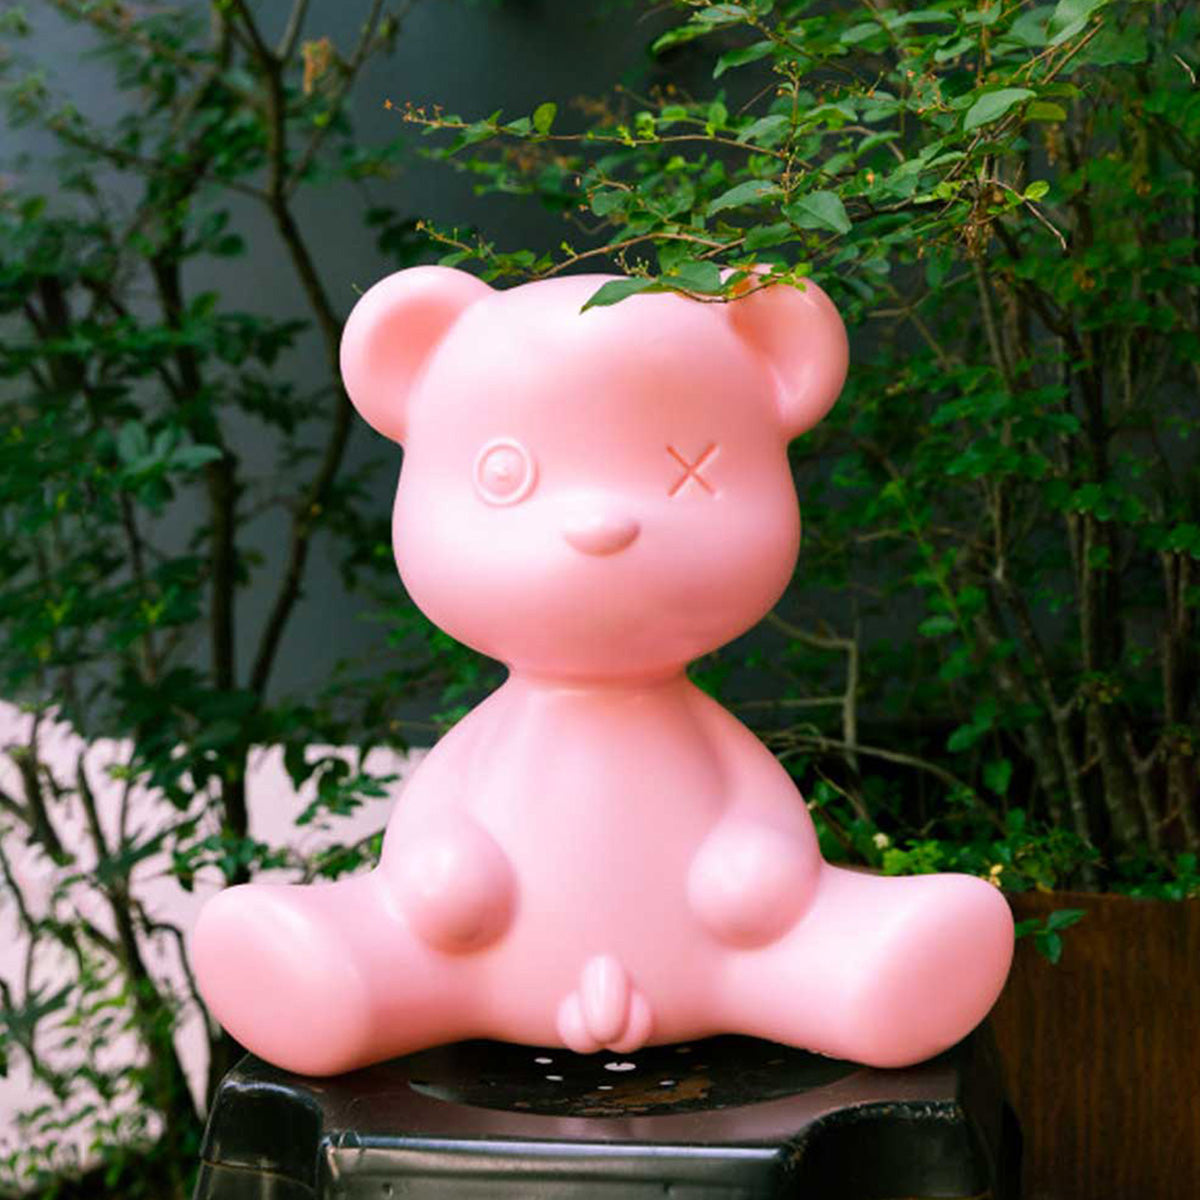 Teddy Boy Lamp With Cable - Qeeboo